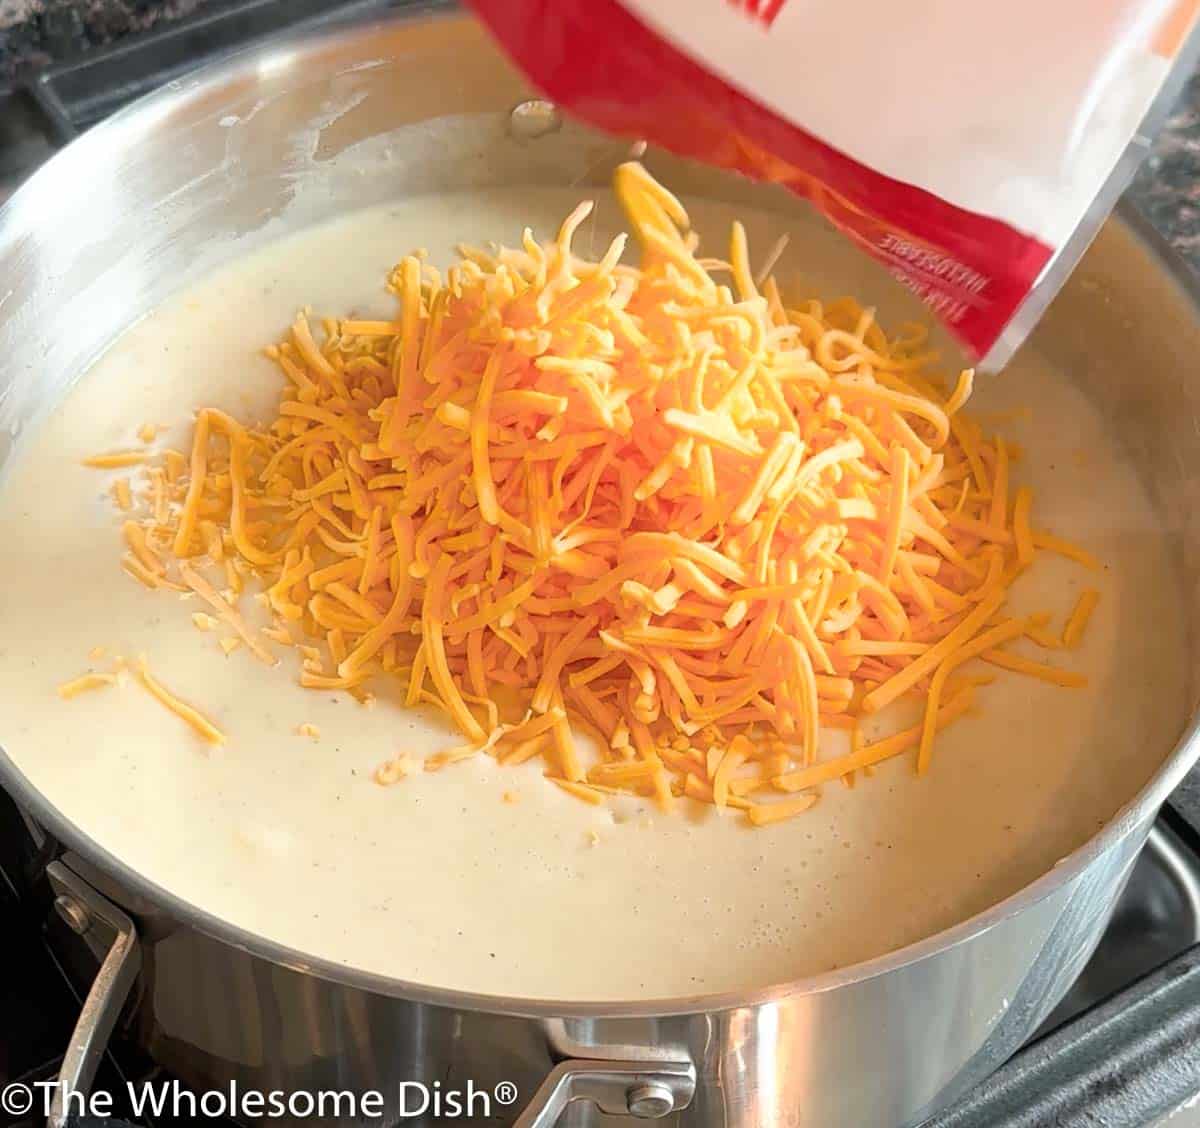 Shredded cheese being added to potato soup in a pot.